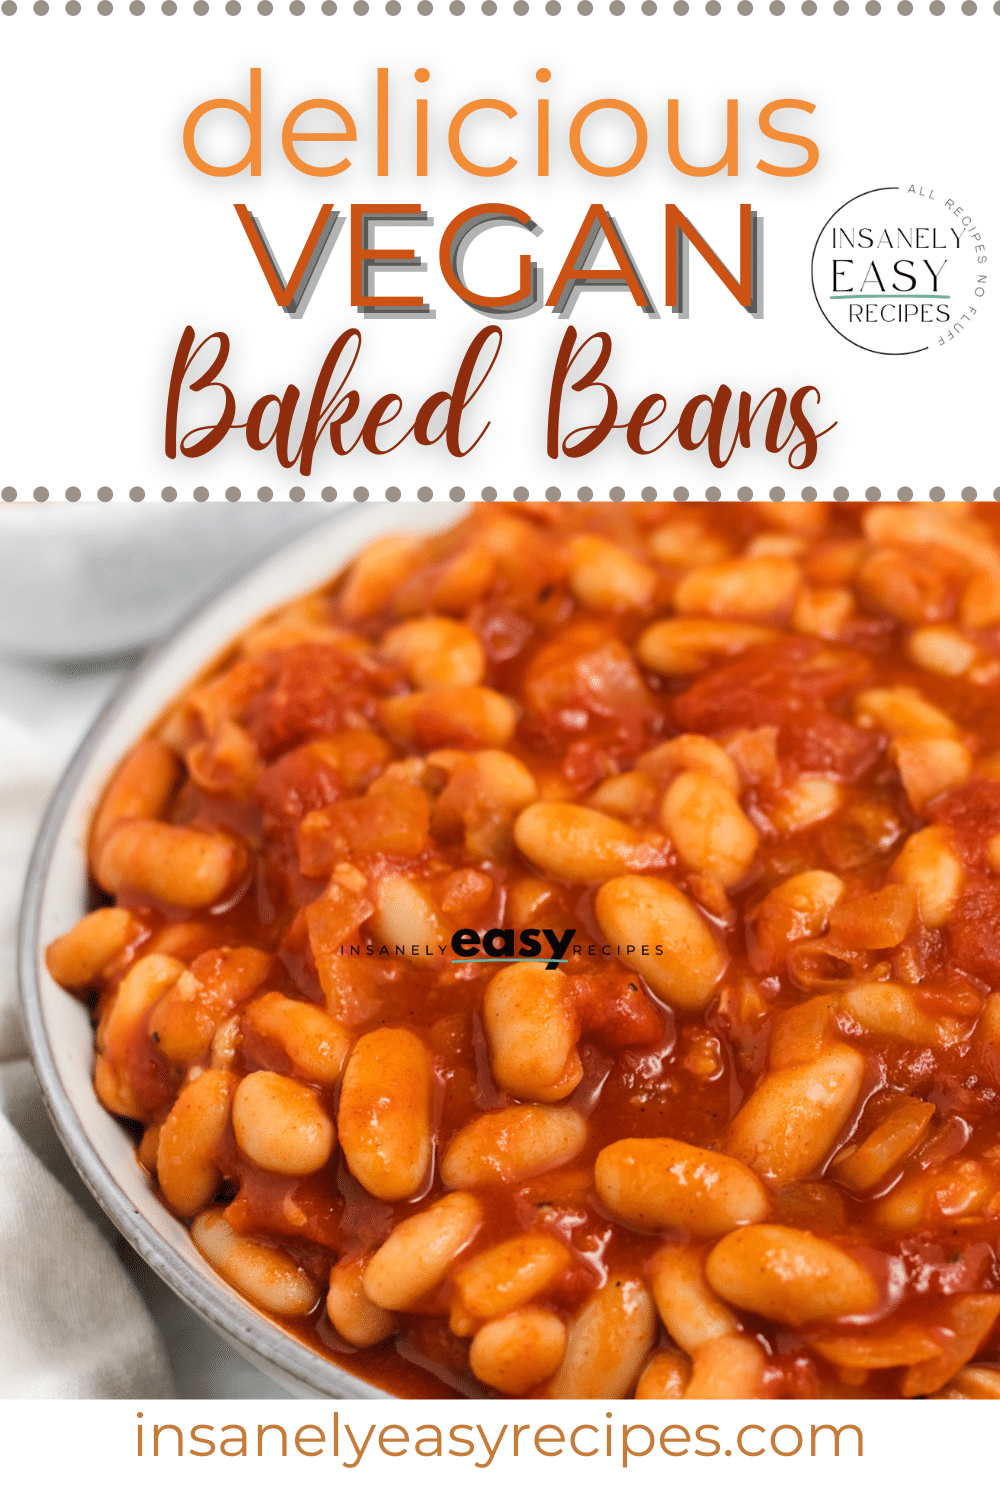 a bowl of baked beans. Text over says "delicious vegan baked beans"